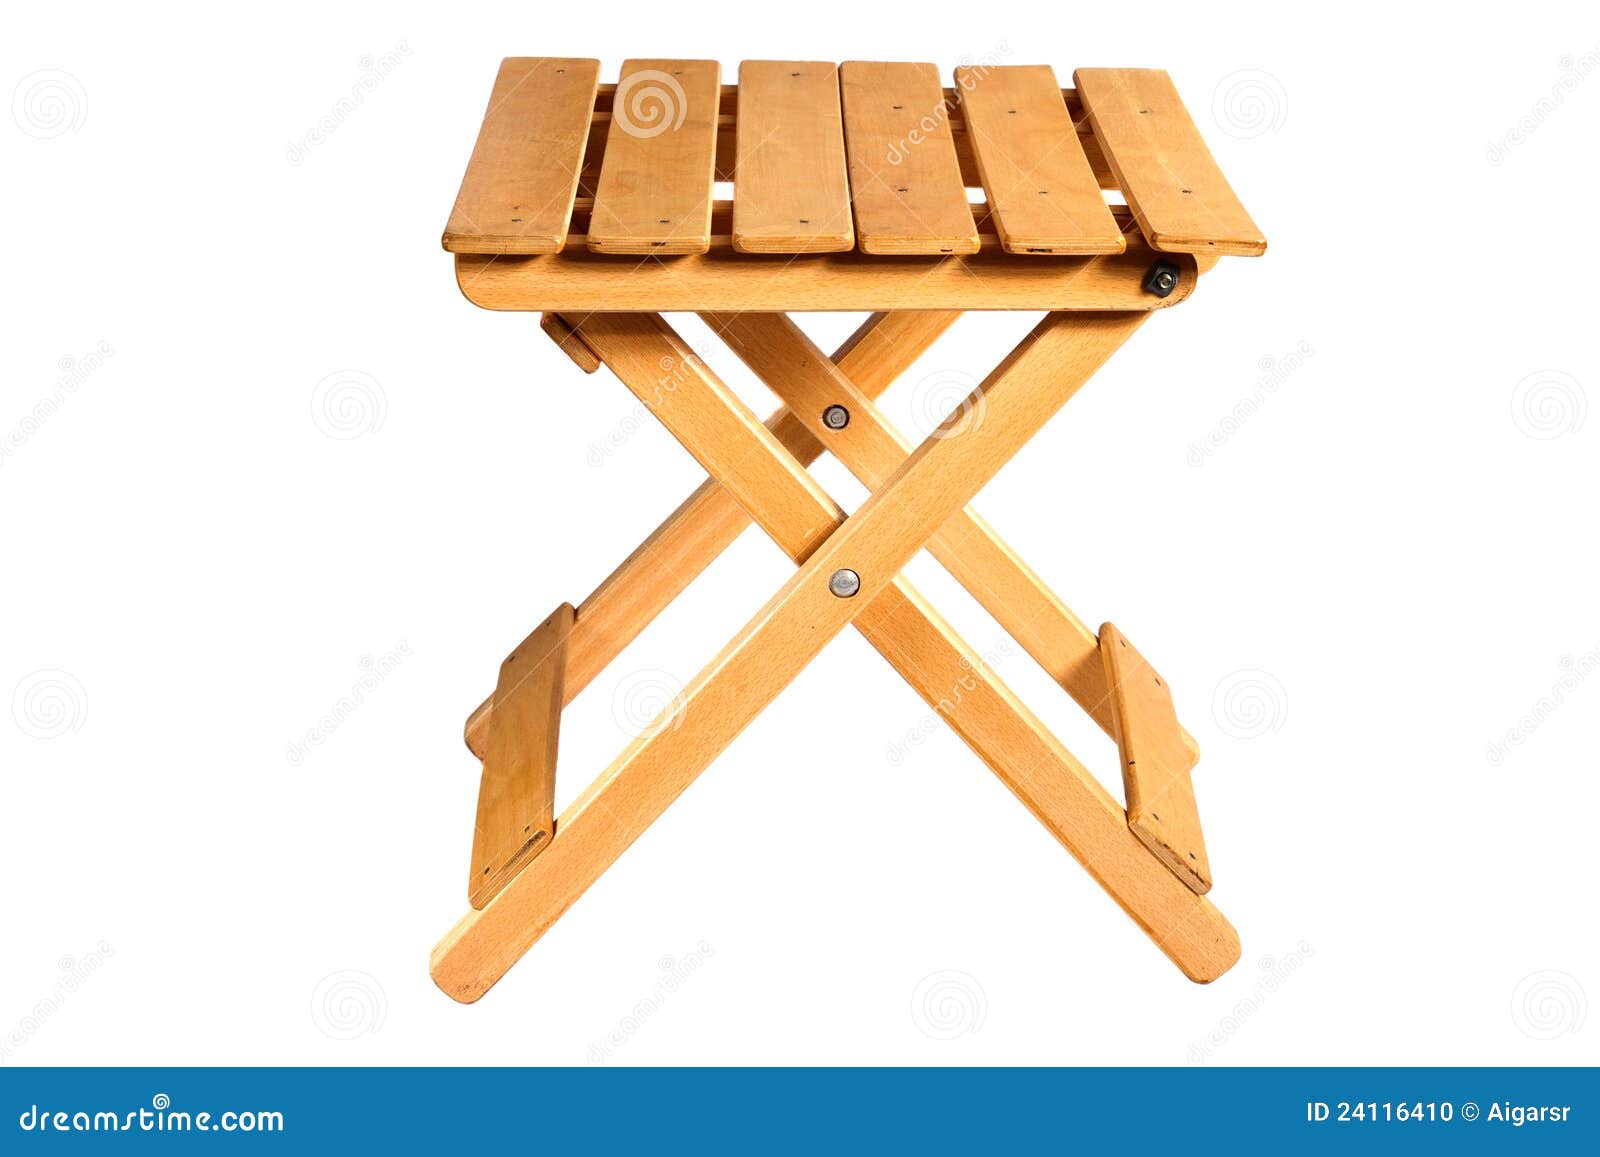 Folding Wooden Chair Stock Photo Image Of Seat Brown 24116410